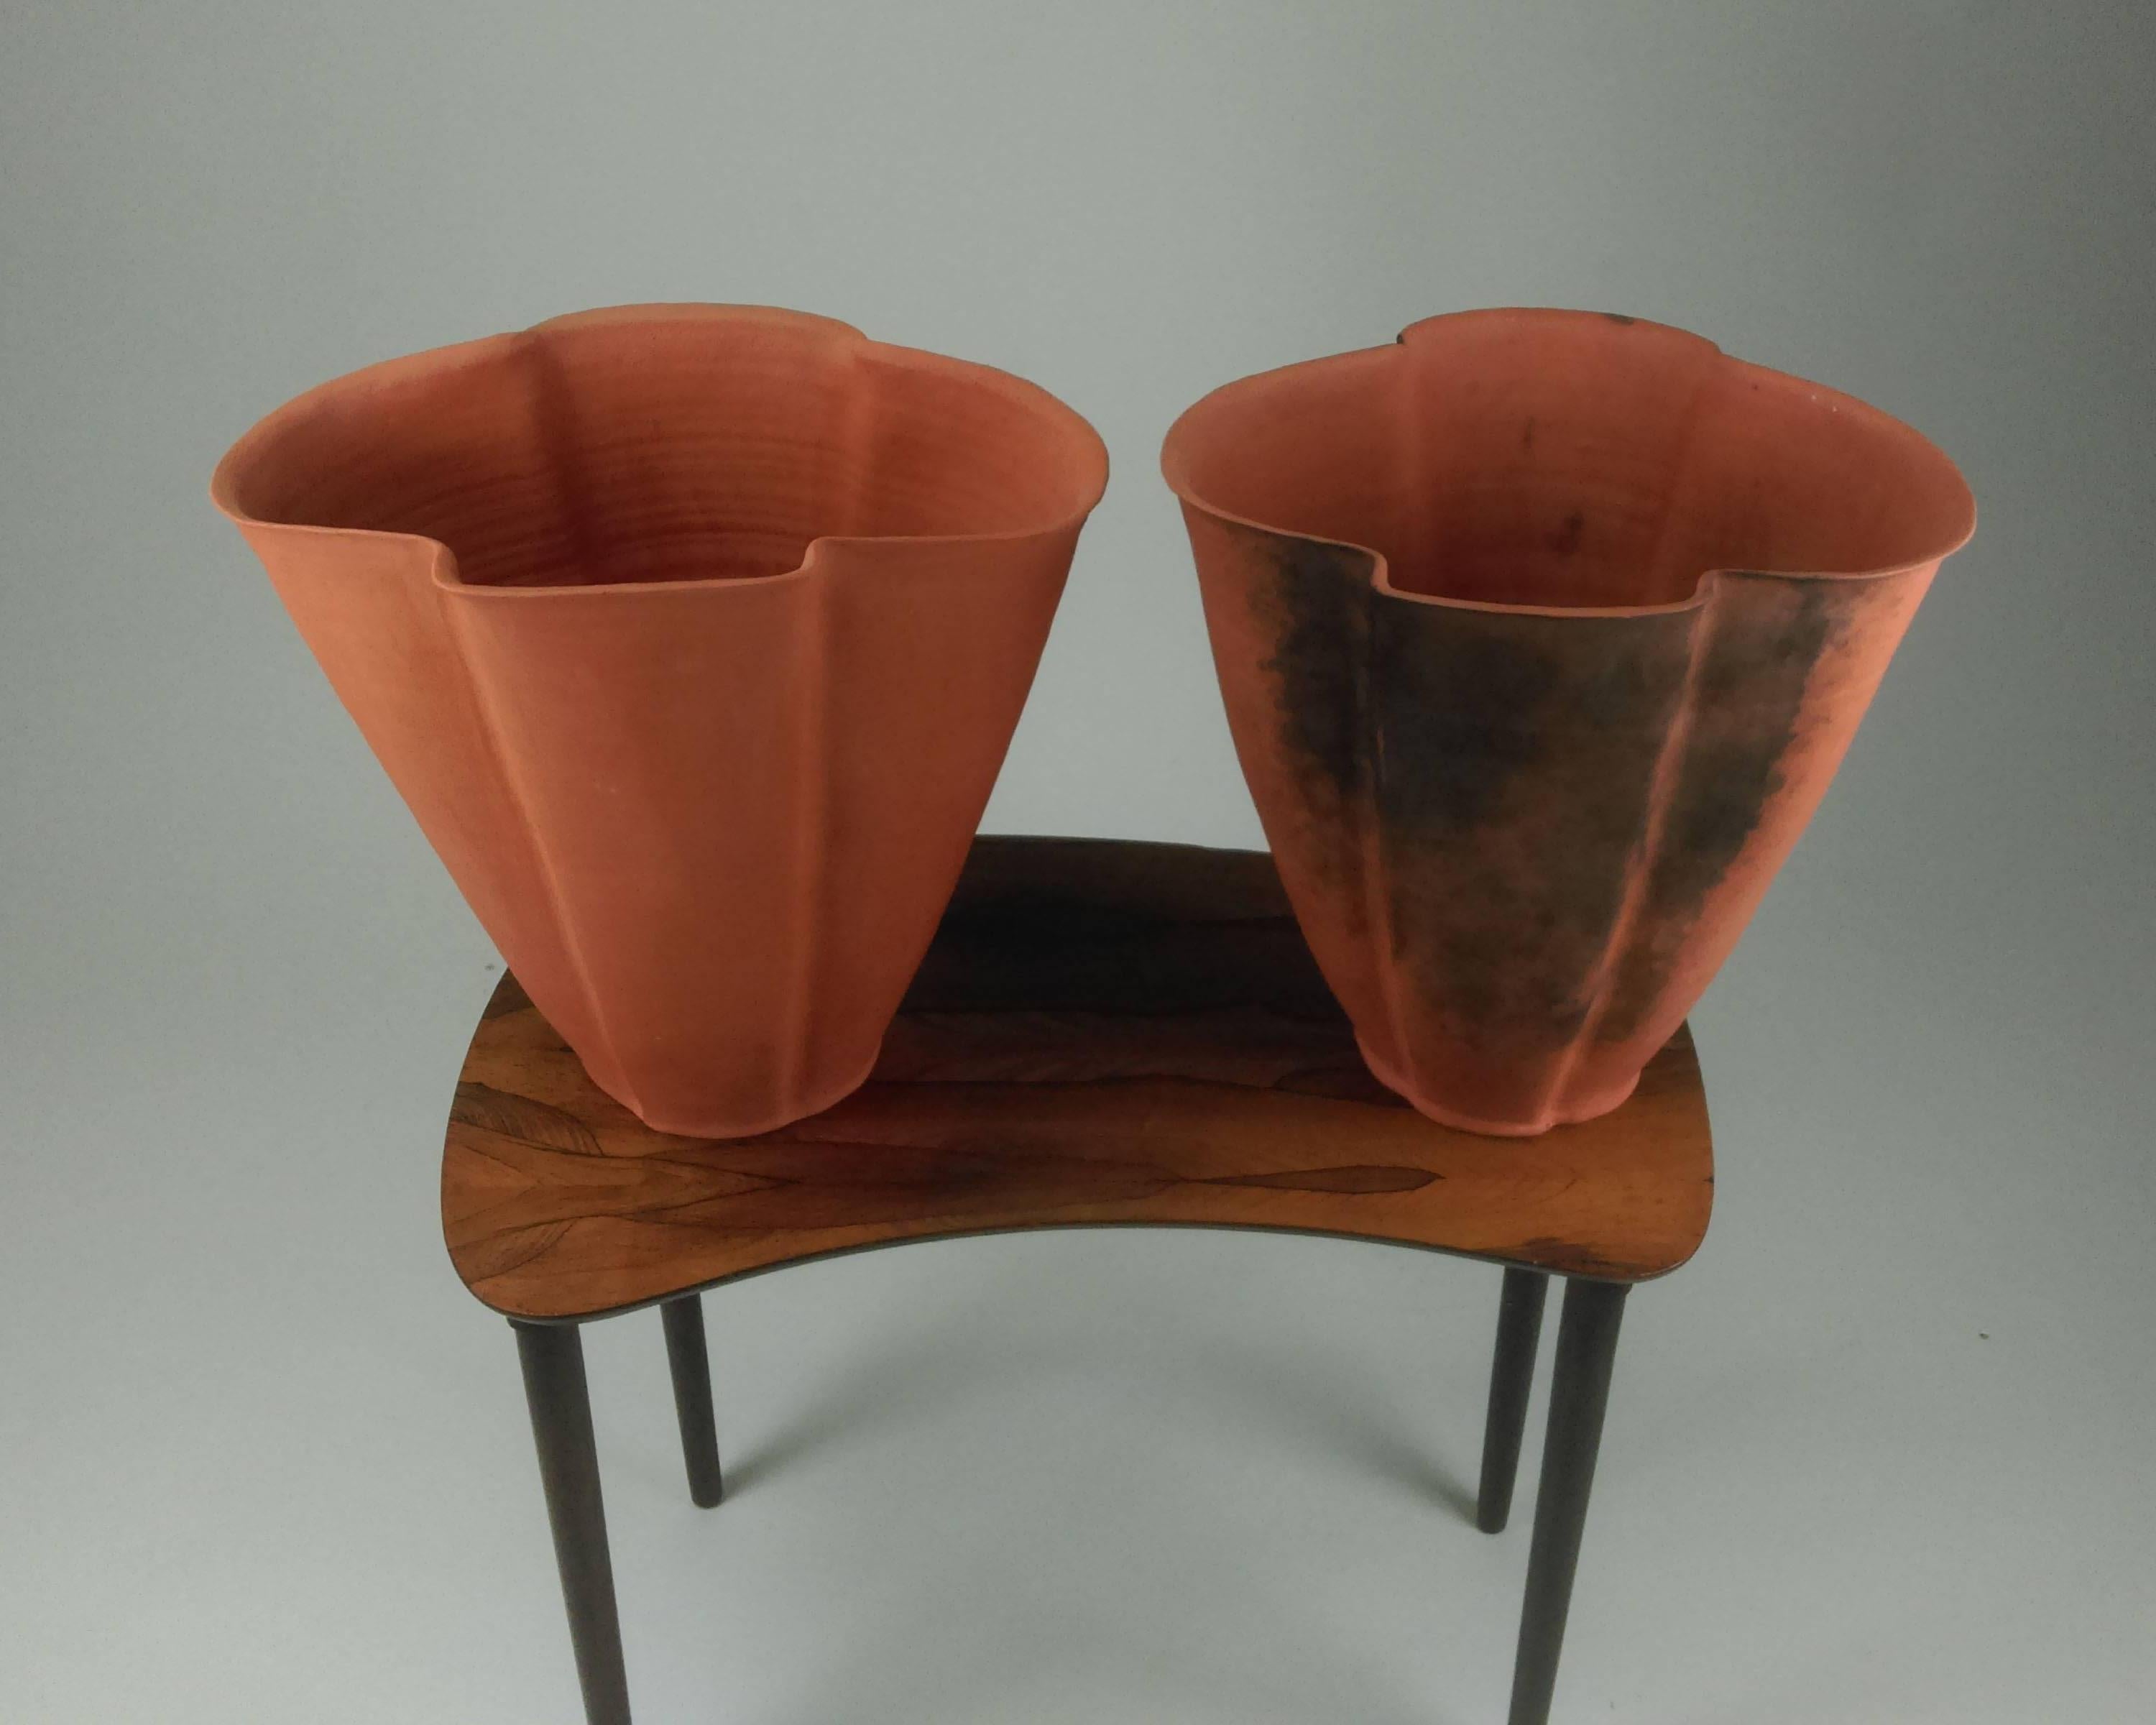 Set of extremely rare large pieces of 1930s pottery from the Kähler Keramik factory in Næstved, Denmark.
The vases are designed by the Danish artist Svend Hammershøi in unglazed terracotta and are in very good condition.